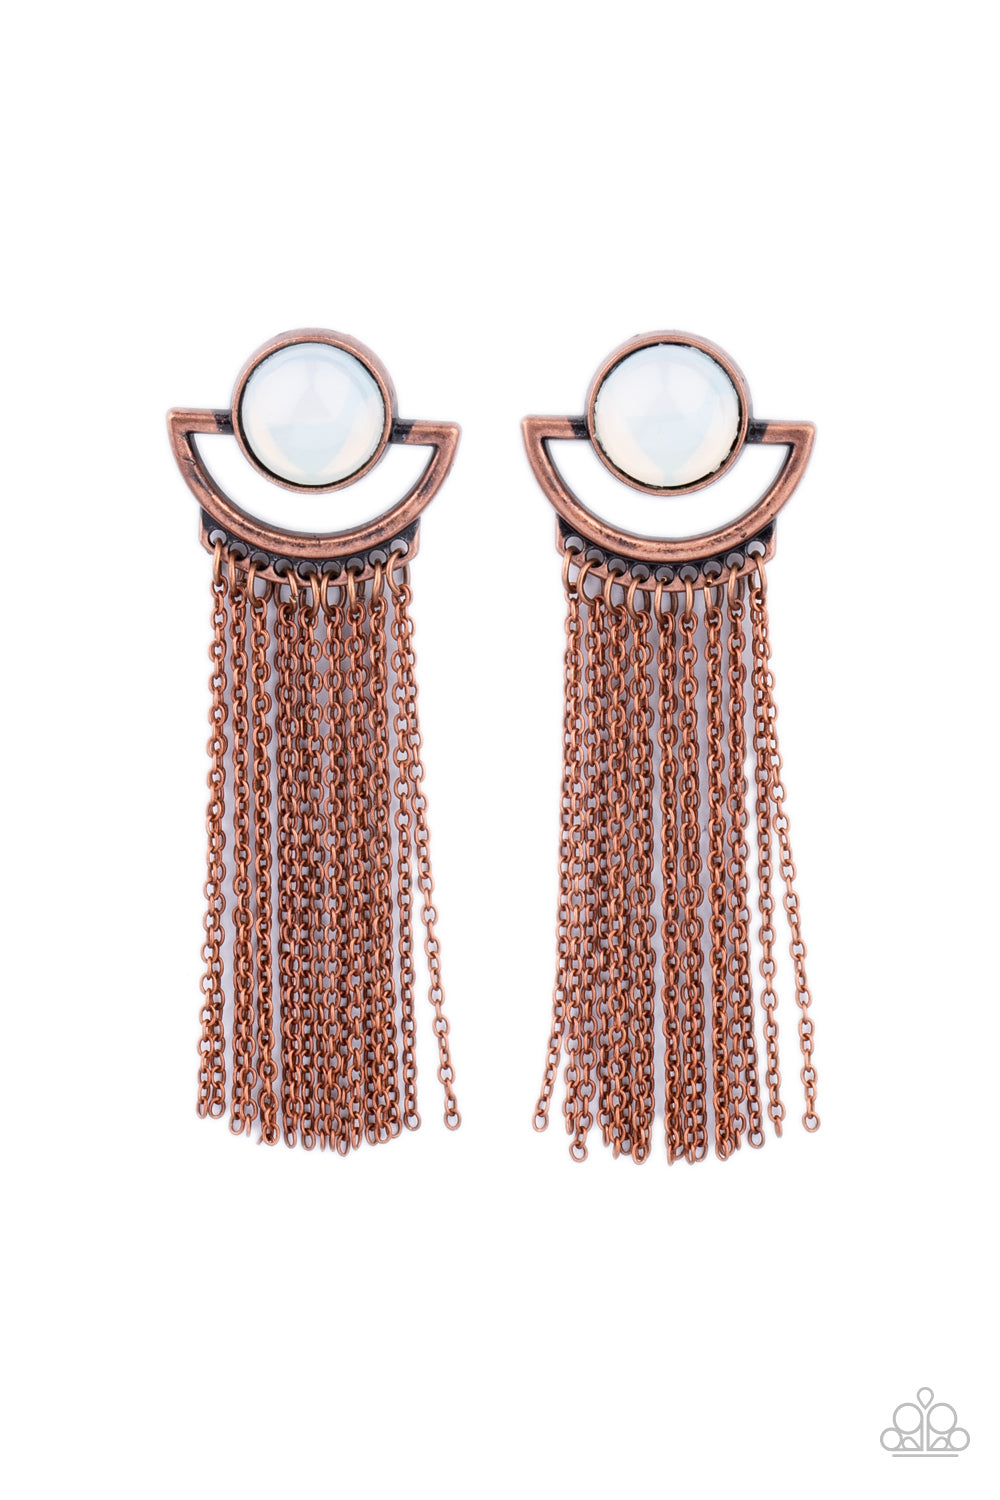 Paparazzi Accessories - A curtain of dainty copper chains stream from the bottom of a rustic crescent shaped copper frame that is dotted in a dewy opal bead for a mystical finish. Earring attaches to a standard post fitting.